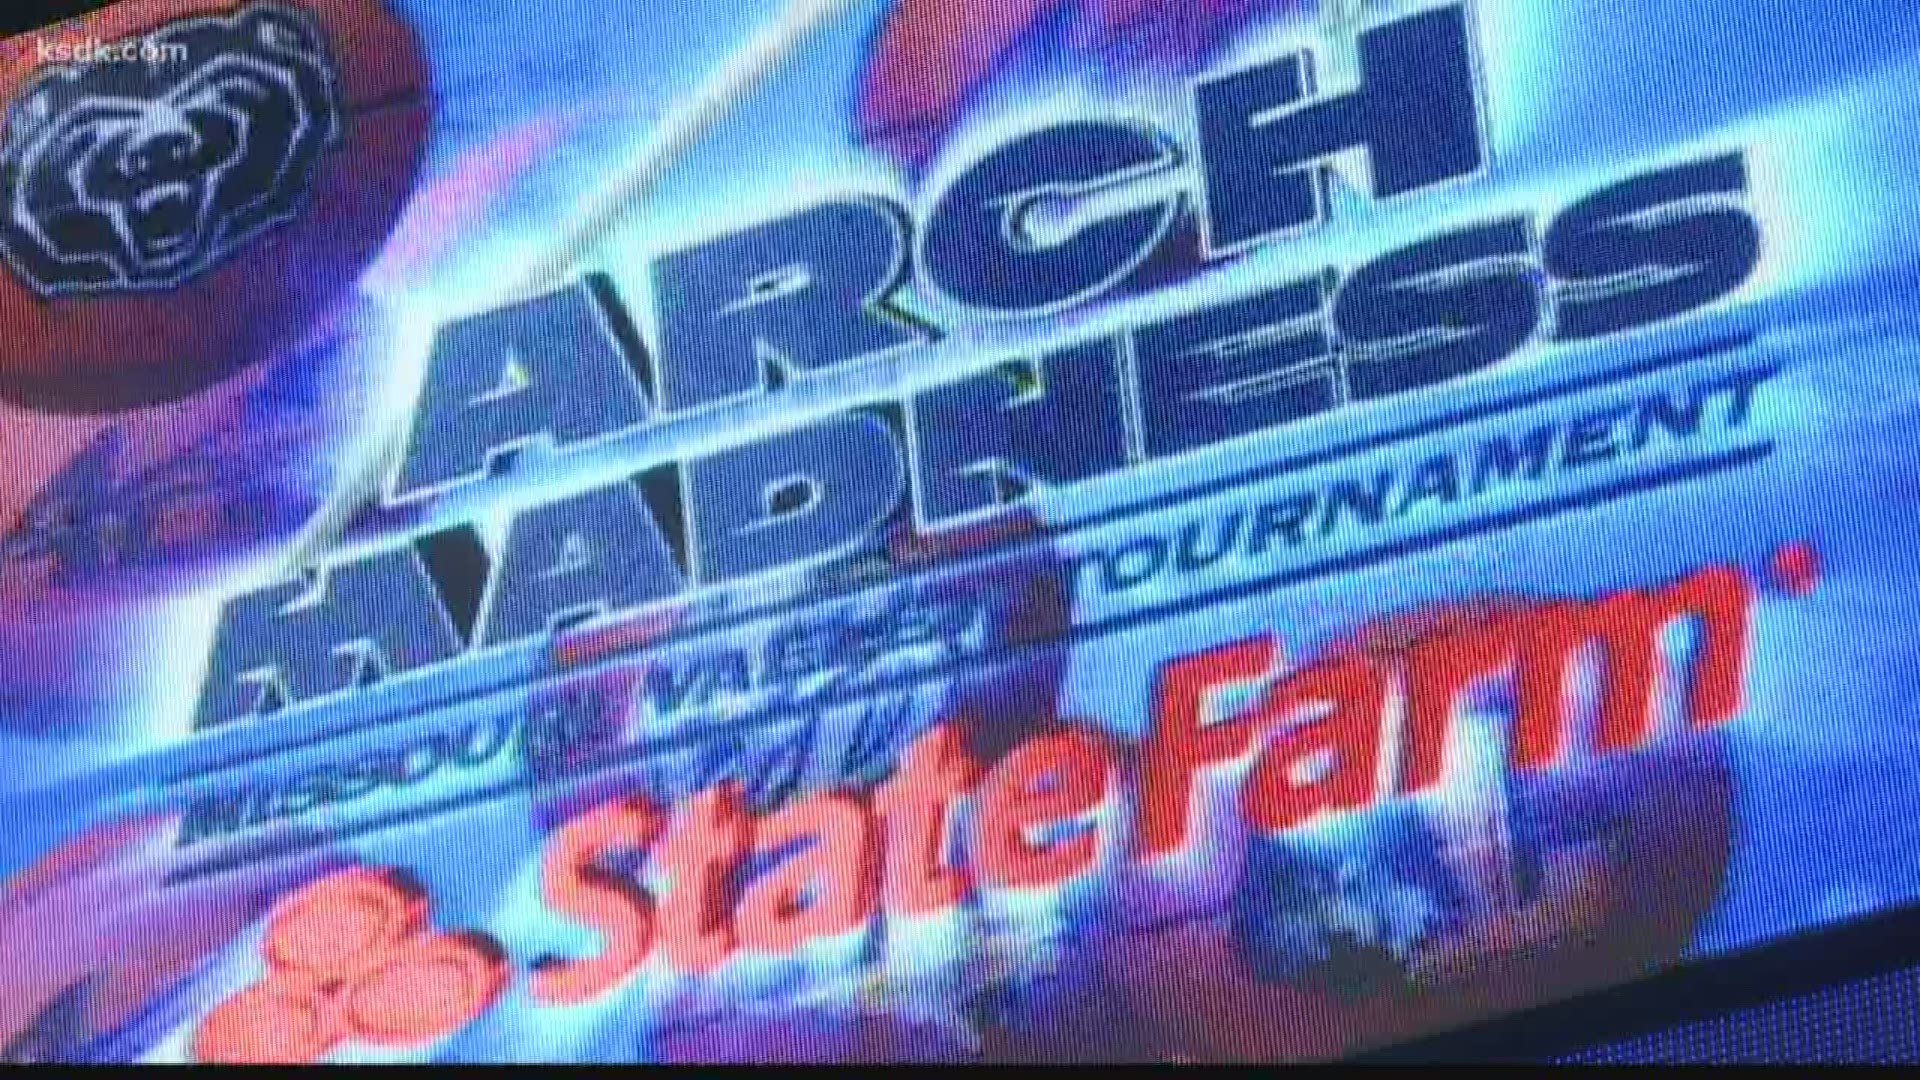 MVC agrees to keep Arch Madness at Enterprise Center through 2024